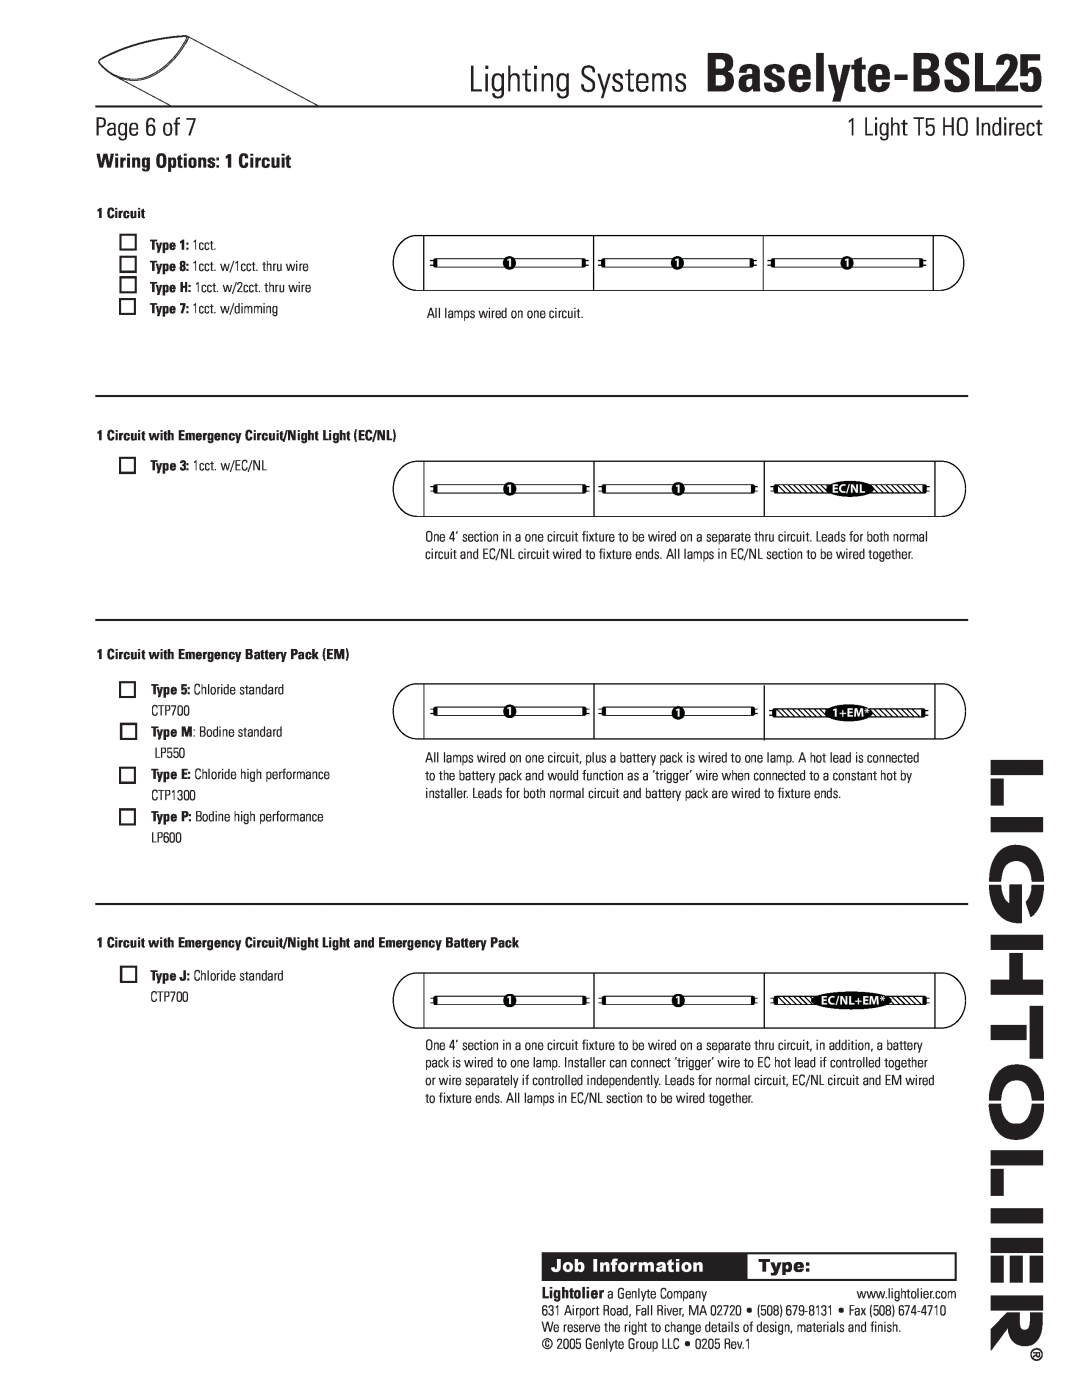 Lightolier Baselyte-BSL25 Wiring Options: 1 Circuit, Circuit Type 1 1cct, Circuit with Emergency Battery Pack EM, Page of 